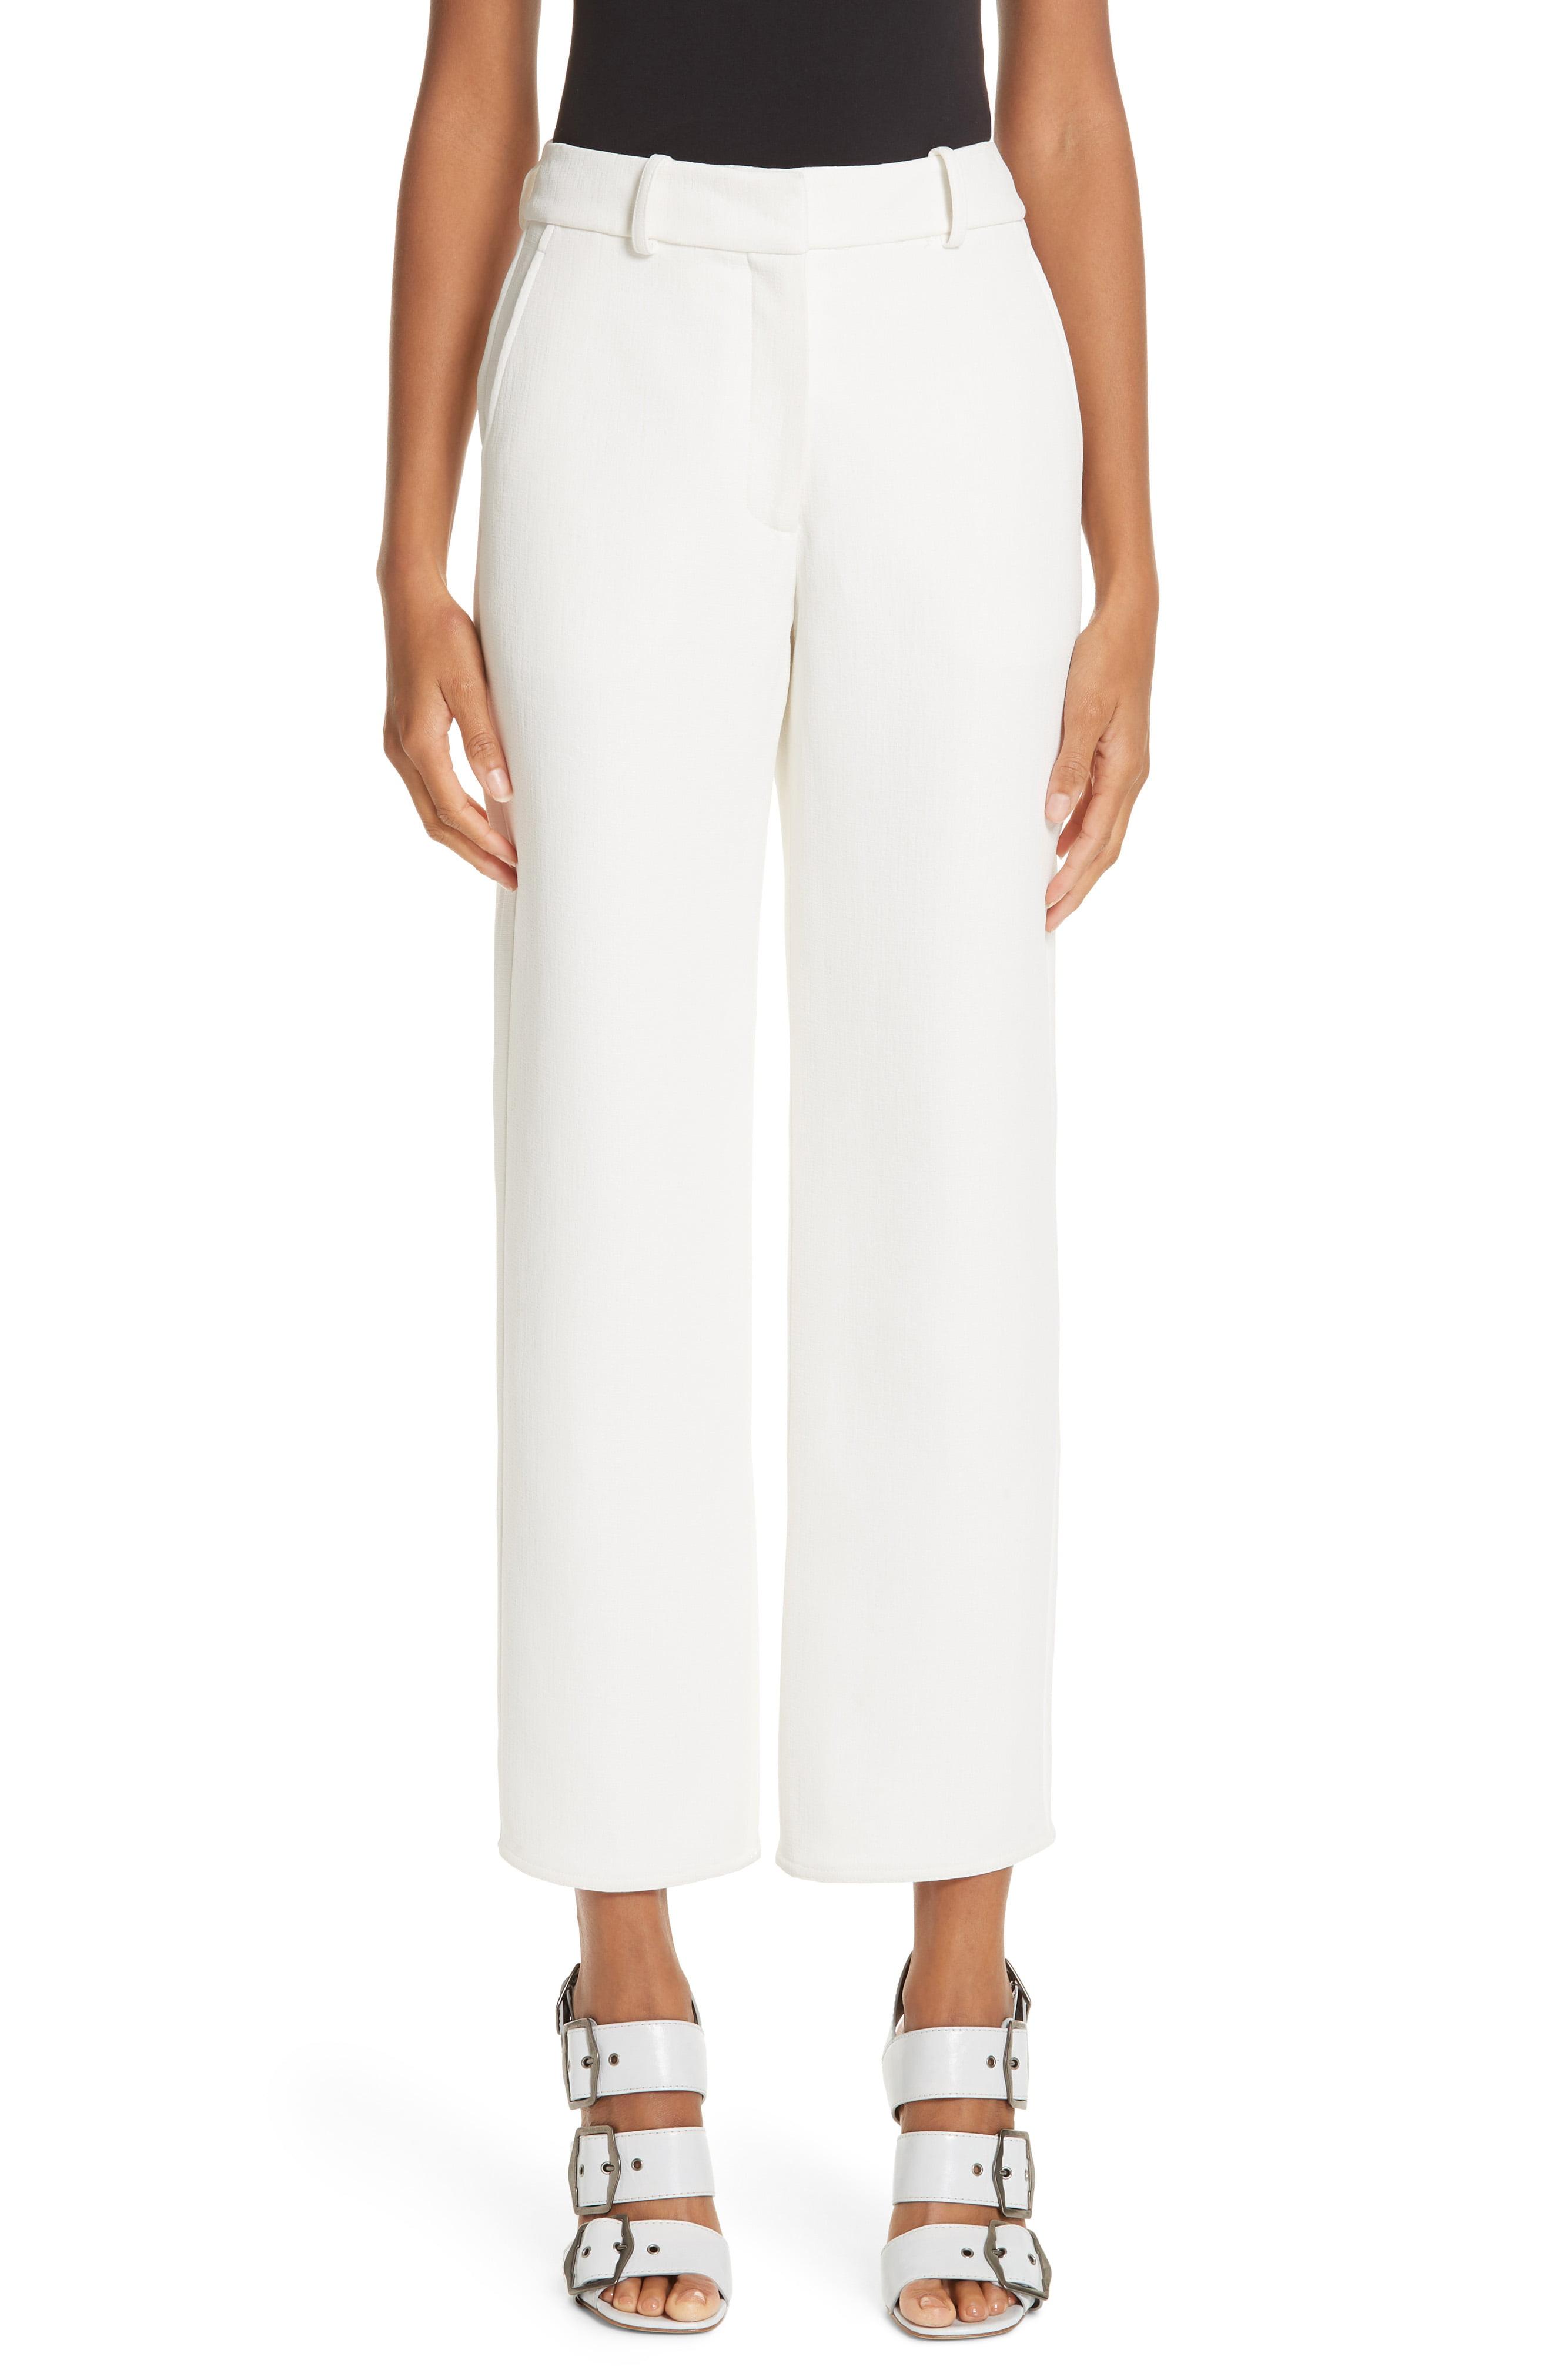 Lyst - Sies Marjan Double Face Crepe Crop Trousers in White